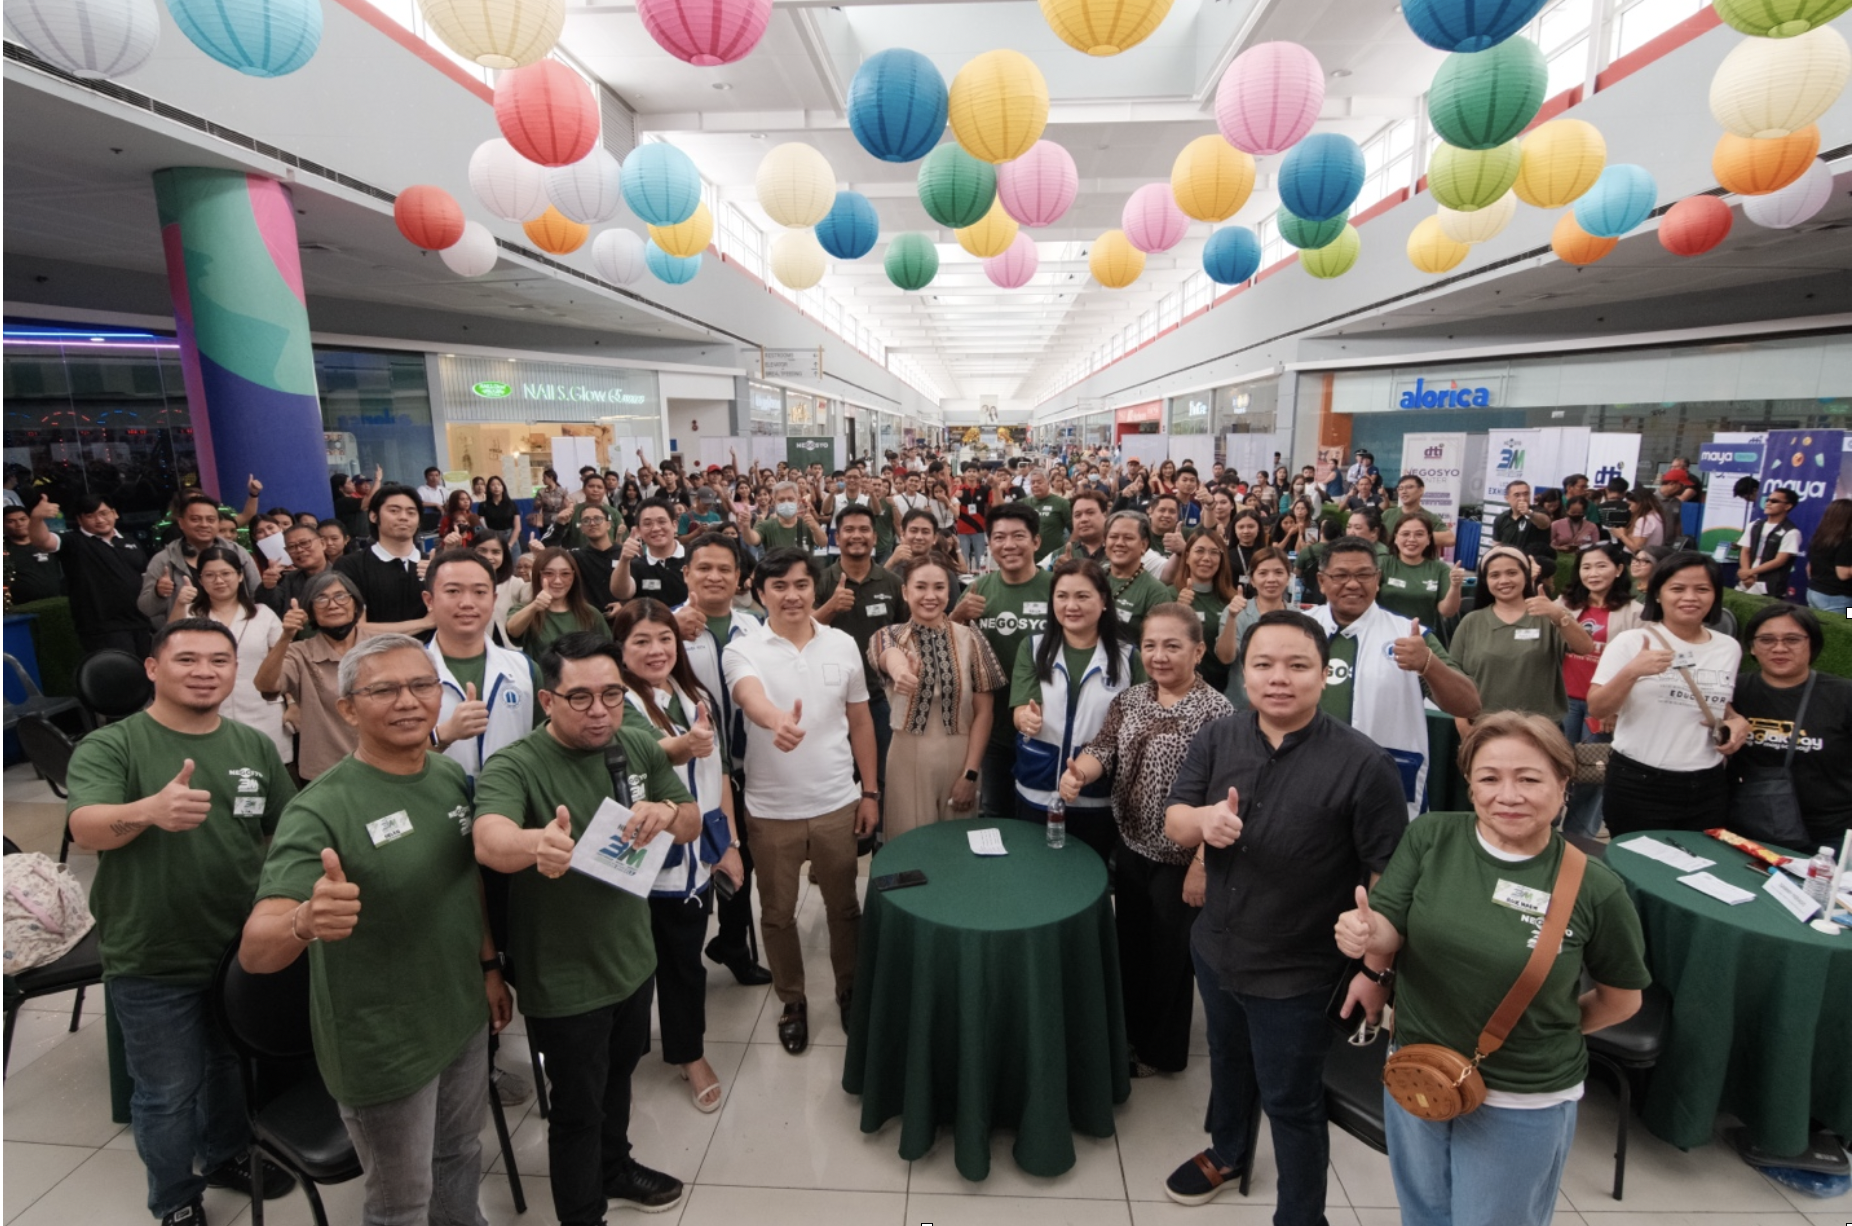 Lipa City Mayor Hon. Eric Africa (center, in white) leads the mentors and MSMEs in giving the signature Go Negosyo thumbs-up. With him are (from left) Rotary Club of Lipa City president Orlan Bancoro, host Michael Angelo Lobrin, Pan De Batangueña owner Alyanna Caringal, PCCI-Lipa Chamber president May Ann Katigbak, DTI Batangas Provincial Director Leila Cabreros, JCI Lipa president Ronnel Sarmiento, and Women's Business Council chairperson Rosemarie Rafael.